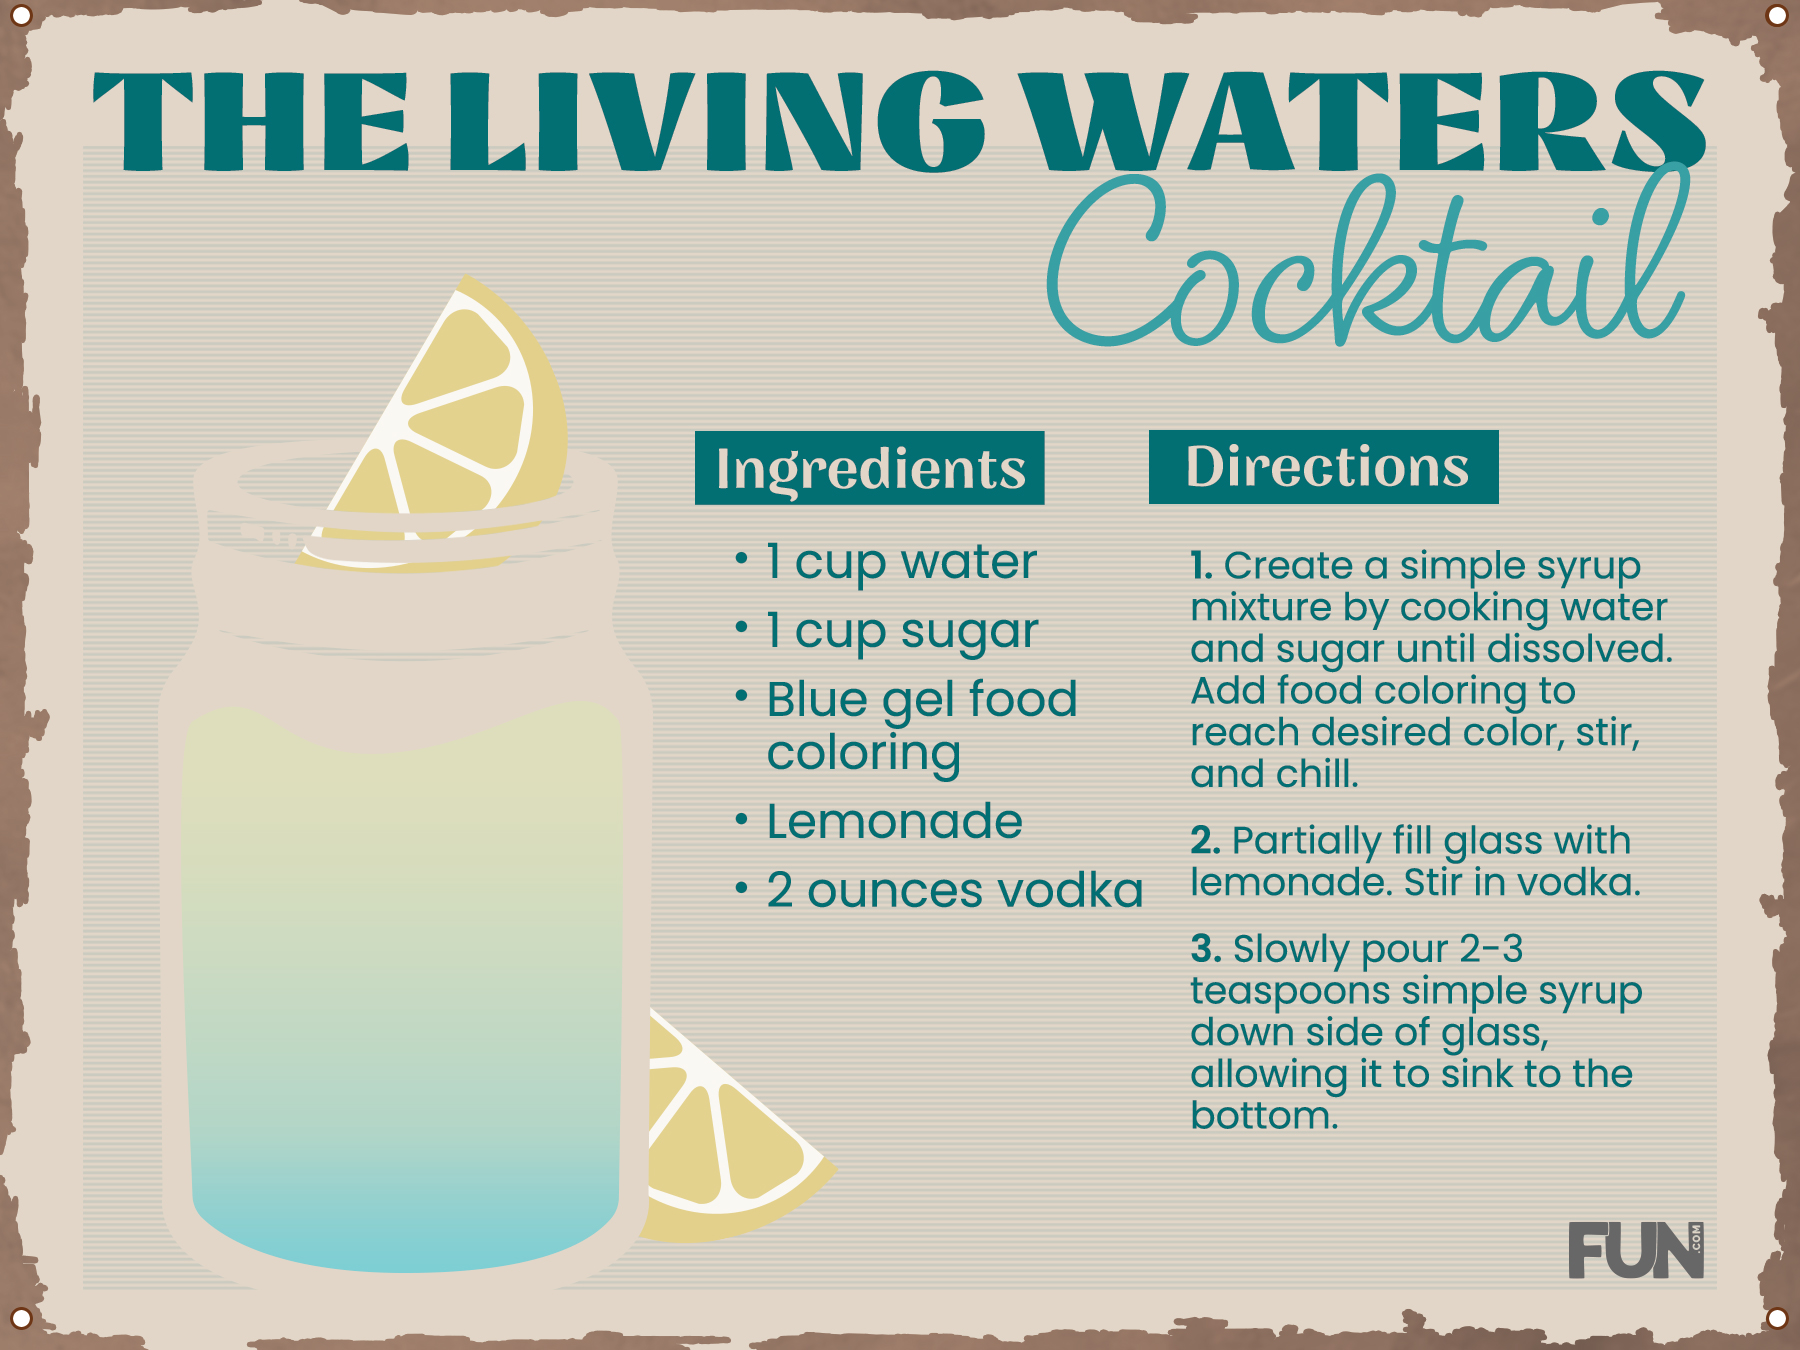 https://images.fun.com/blog/799/star-wars-the-living-waters-cocktail.jpg